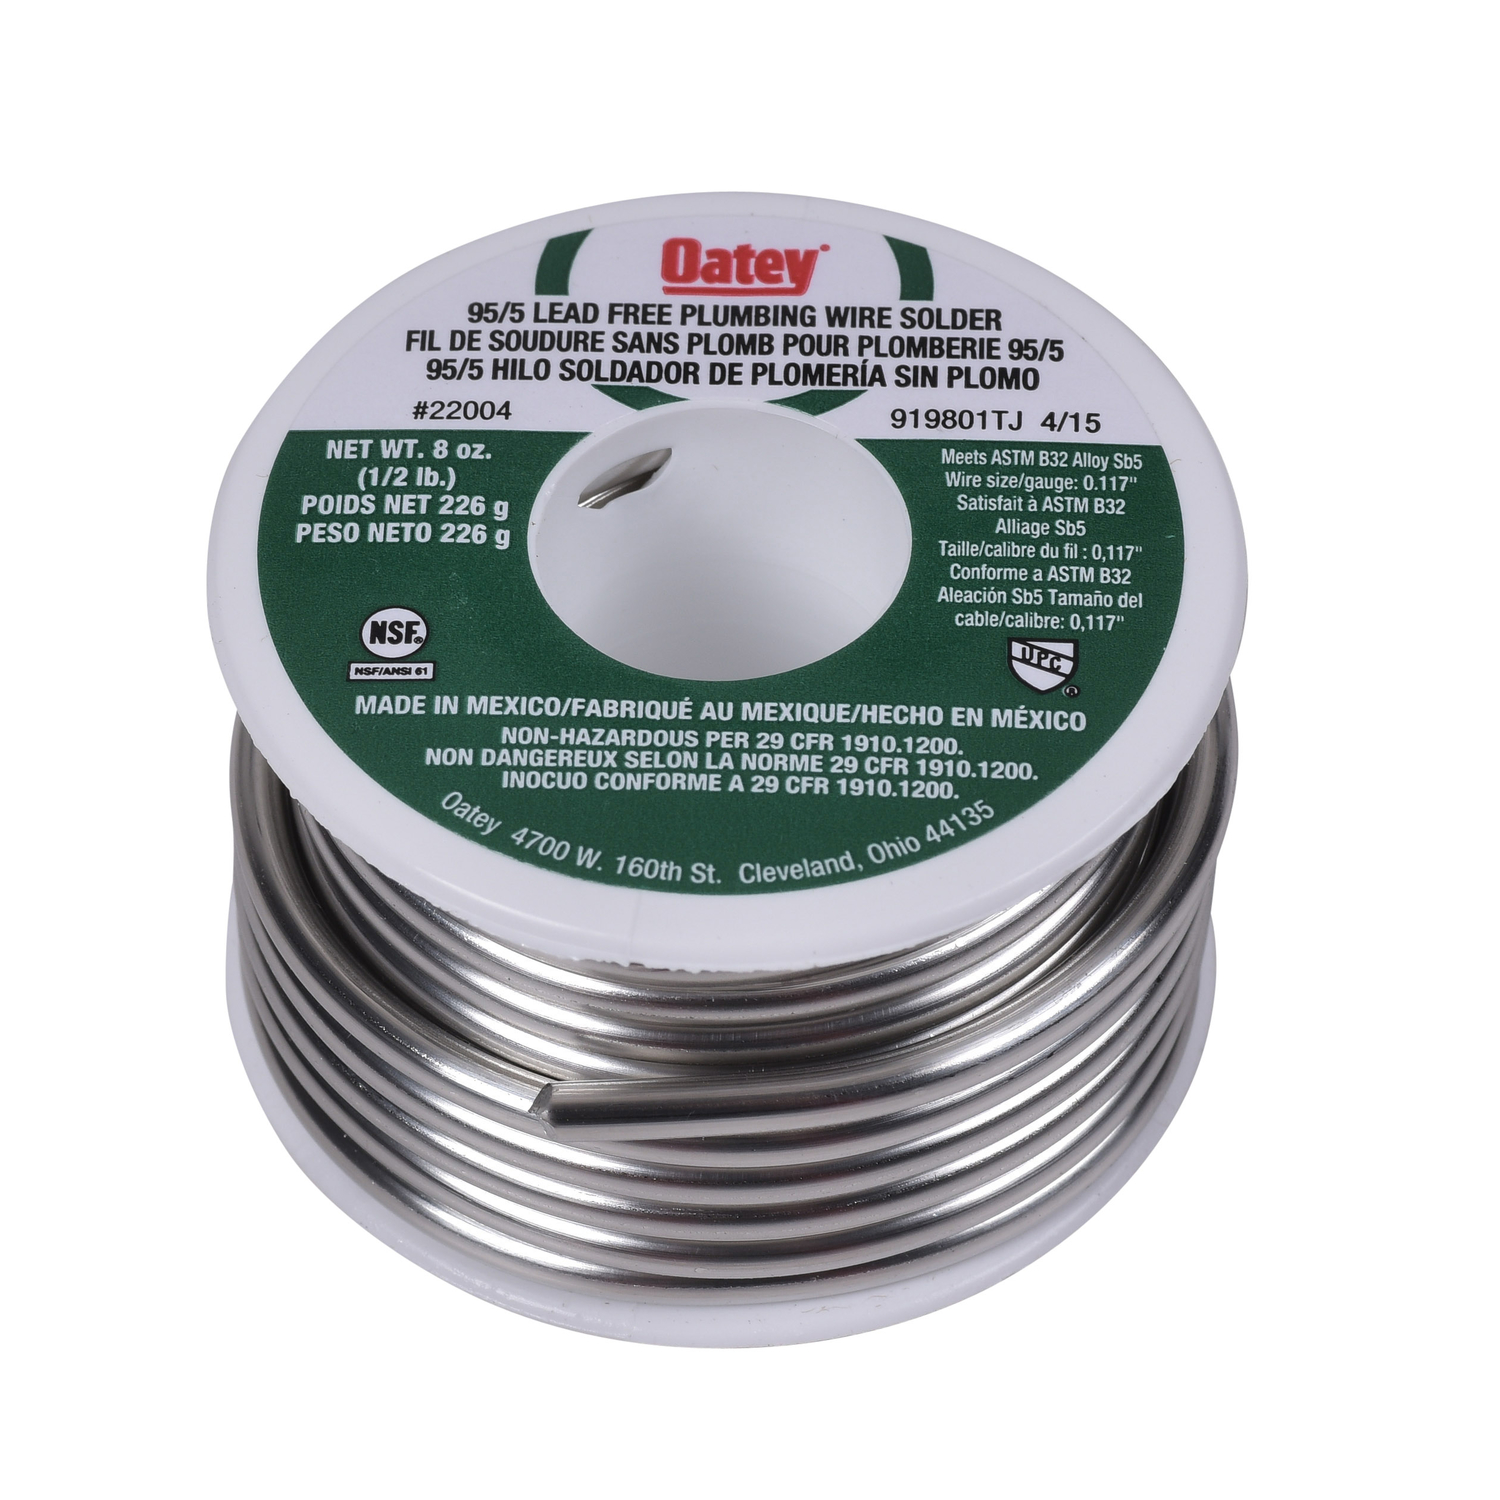 UPC 038753220048 product image for Oatey 8 oz. Lead-Free Tin/Antimony 95/5 Plumbing Wire Solder 1 pc. | upcitemdb.com